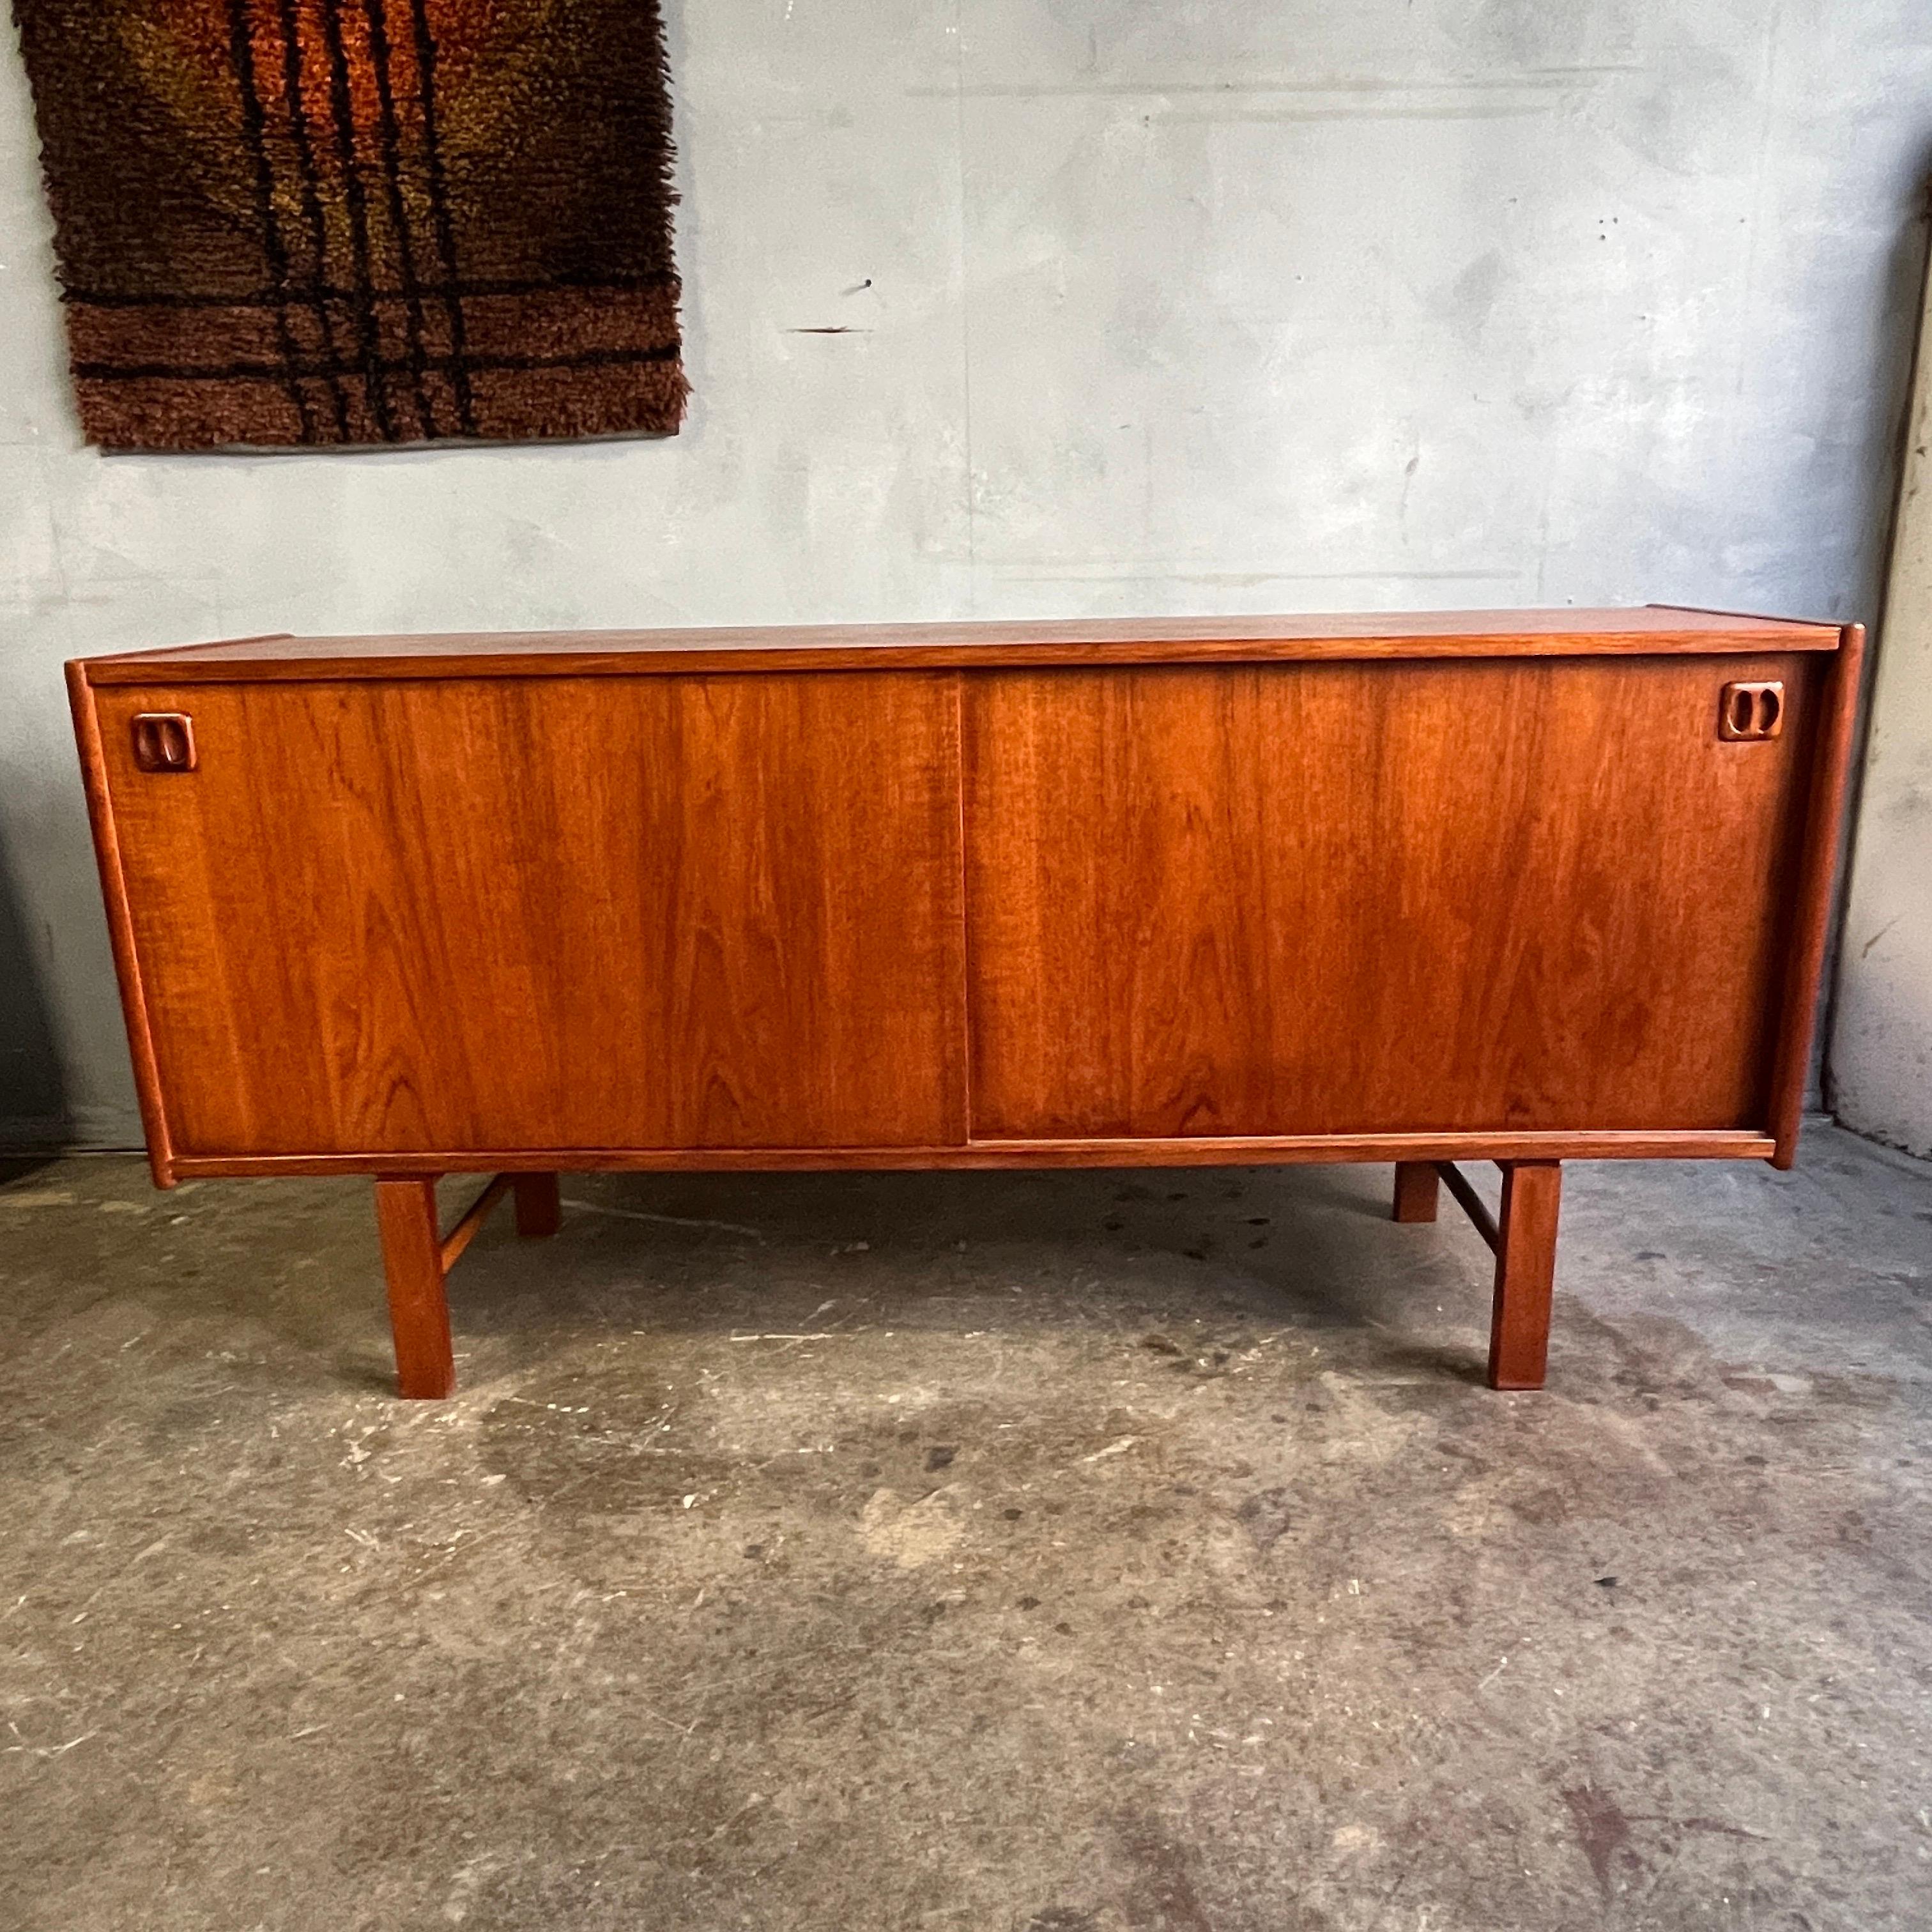 Rare Scandinavian Danish Modern sideboard in Teak wood designed by Erik Worts for Ikea 1960's. One of the most soft after designers and somewhat elusive as Erik Worts only designed a few pieces for IKEA and very few of these credenzas were ever